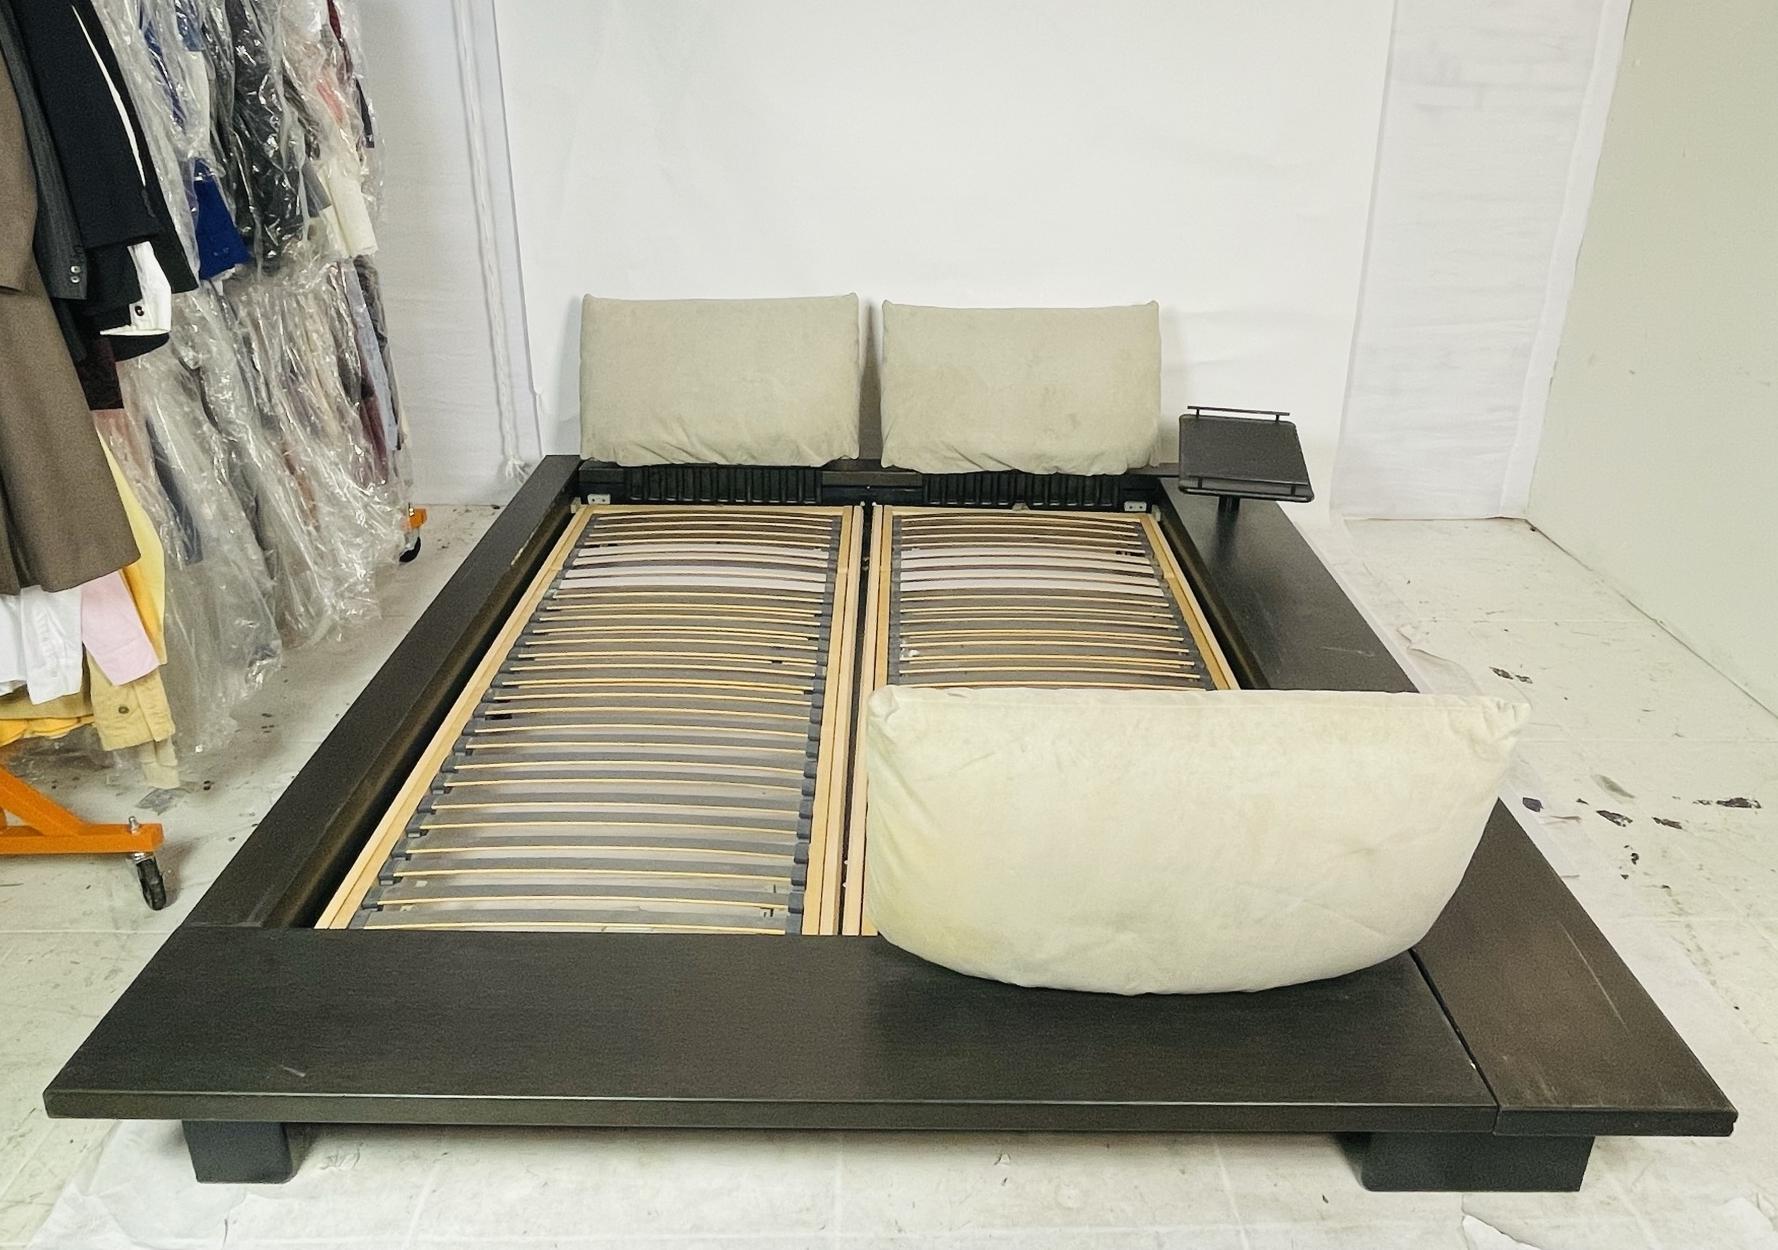 This is the original iconic platform bed created by German designer Peter Maly for Ligne Roset, purchased in San Francisco in 1998. It is a European queen size, and the frame is made of a beautiful dark laminated wood in an asymmetrical design with